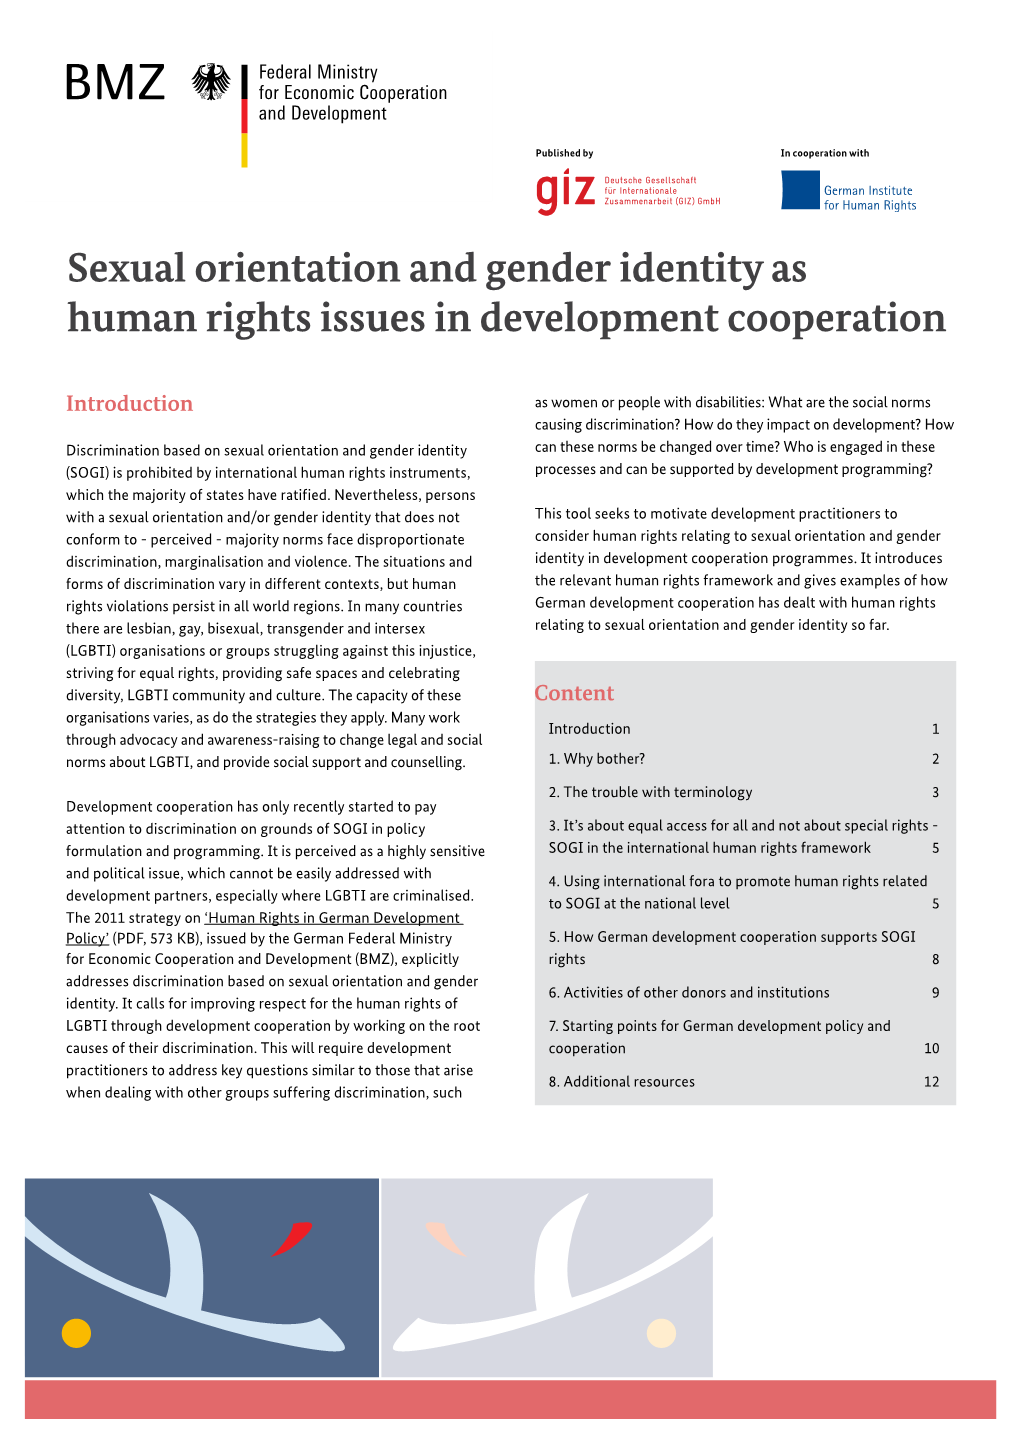 Sexual Orientation and Gender Identity As Human Rights Issues in Development Cooperation